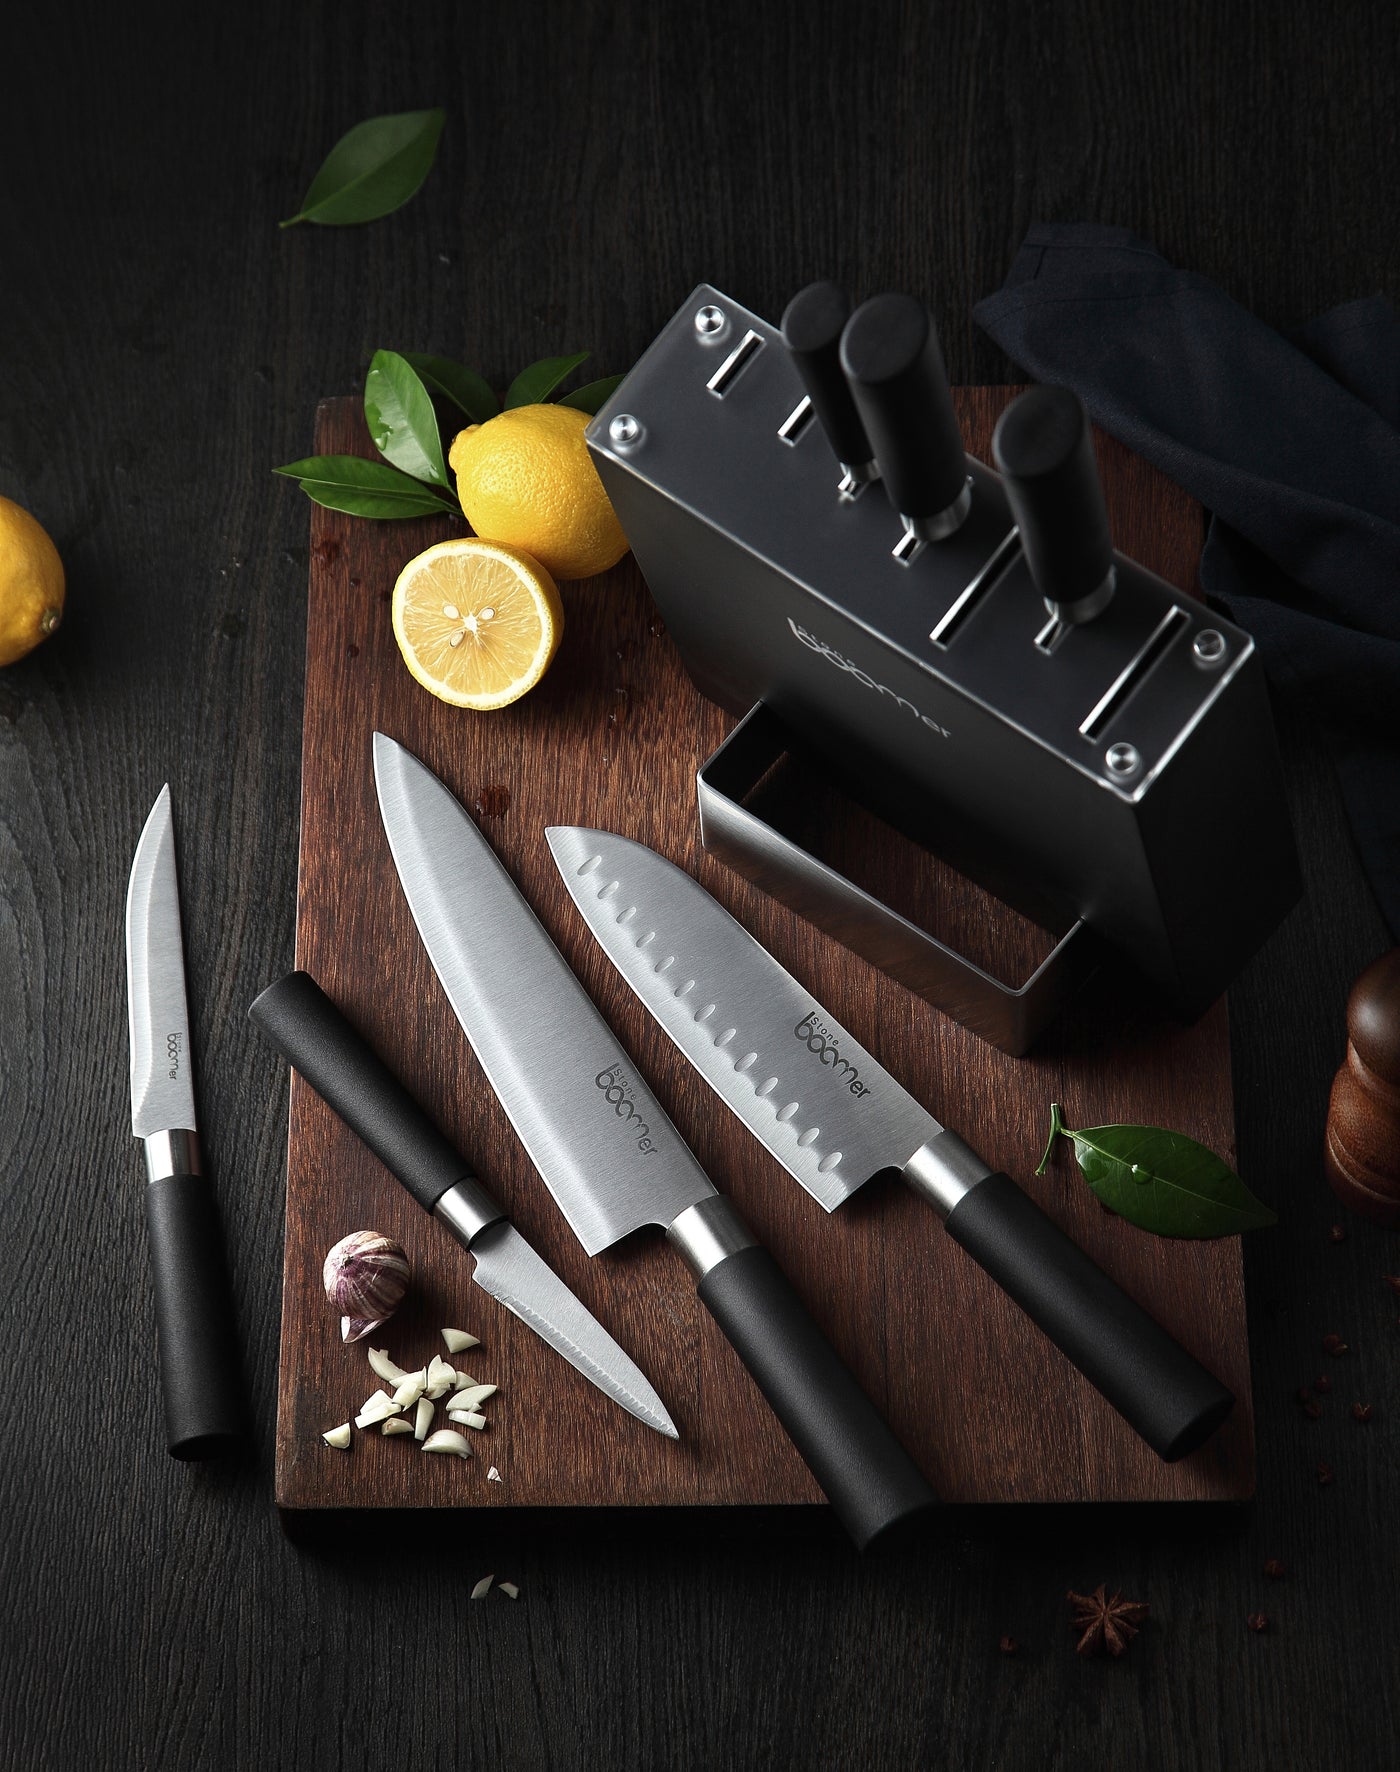 Amazing Beautiful 13 Piece Stainless Steel Kitchen Knife And Utensil S –  Stone boomer